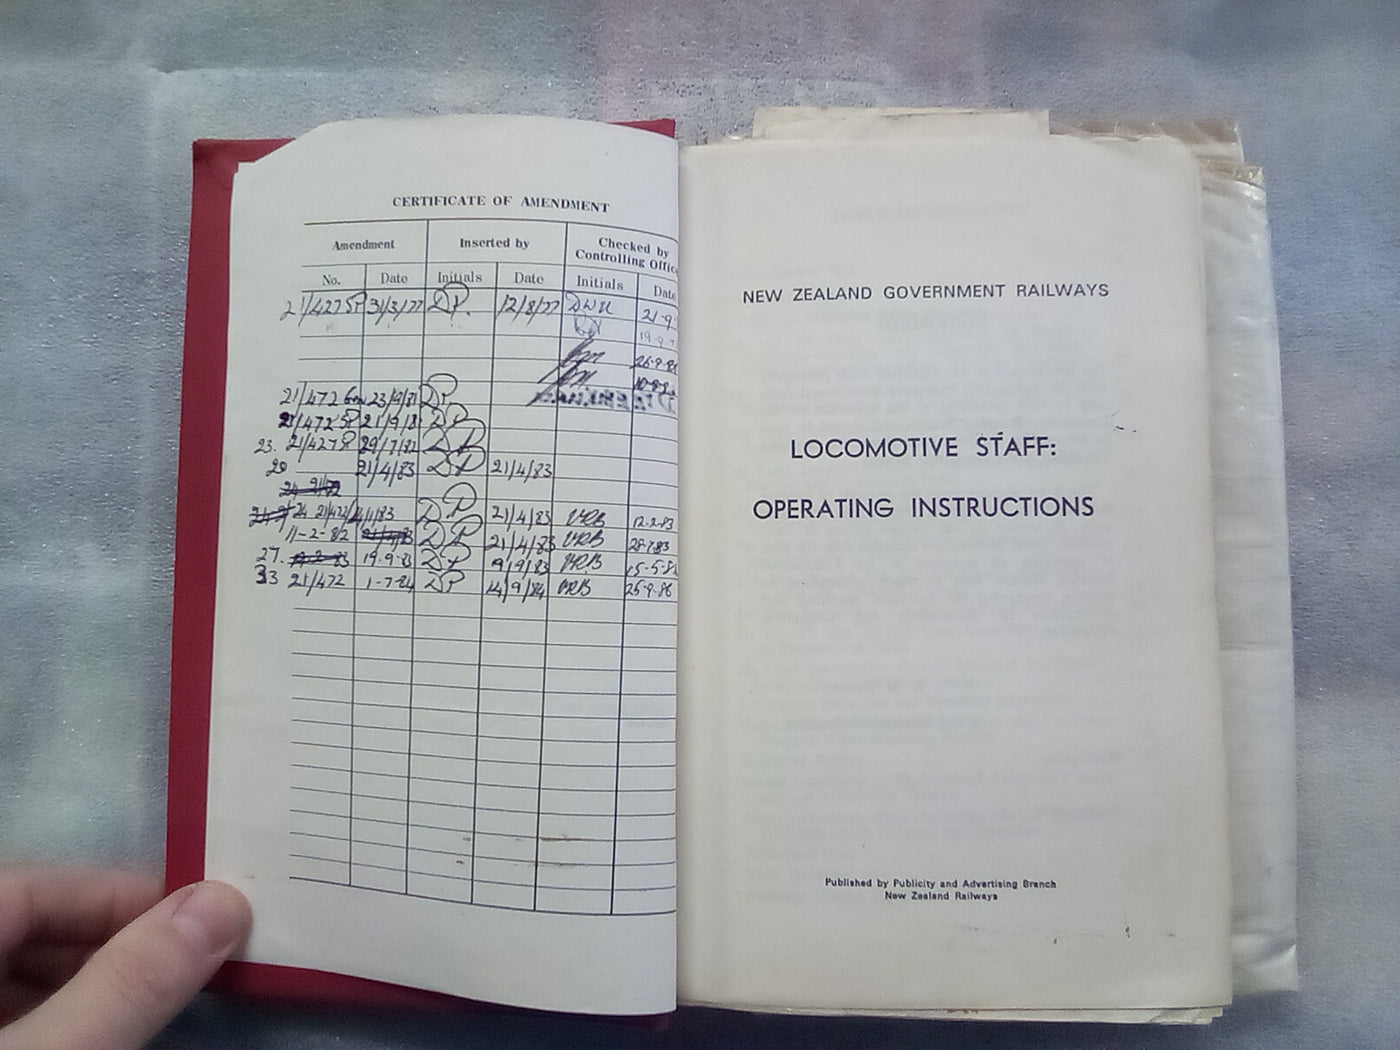 Locomotive Staff Operating Instructions by New Zealand Government Railways